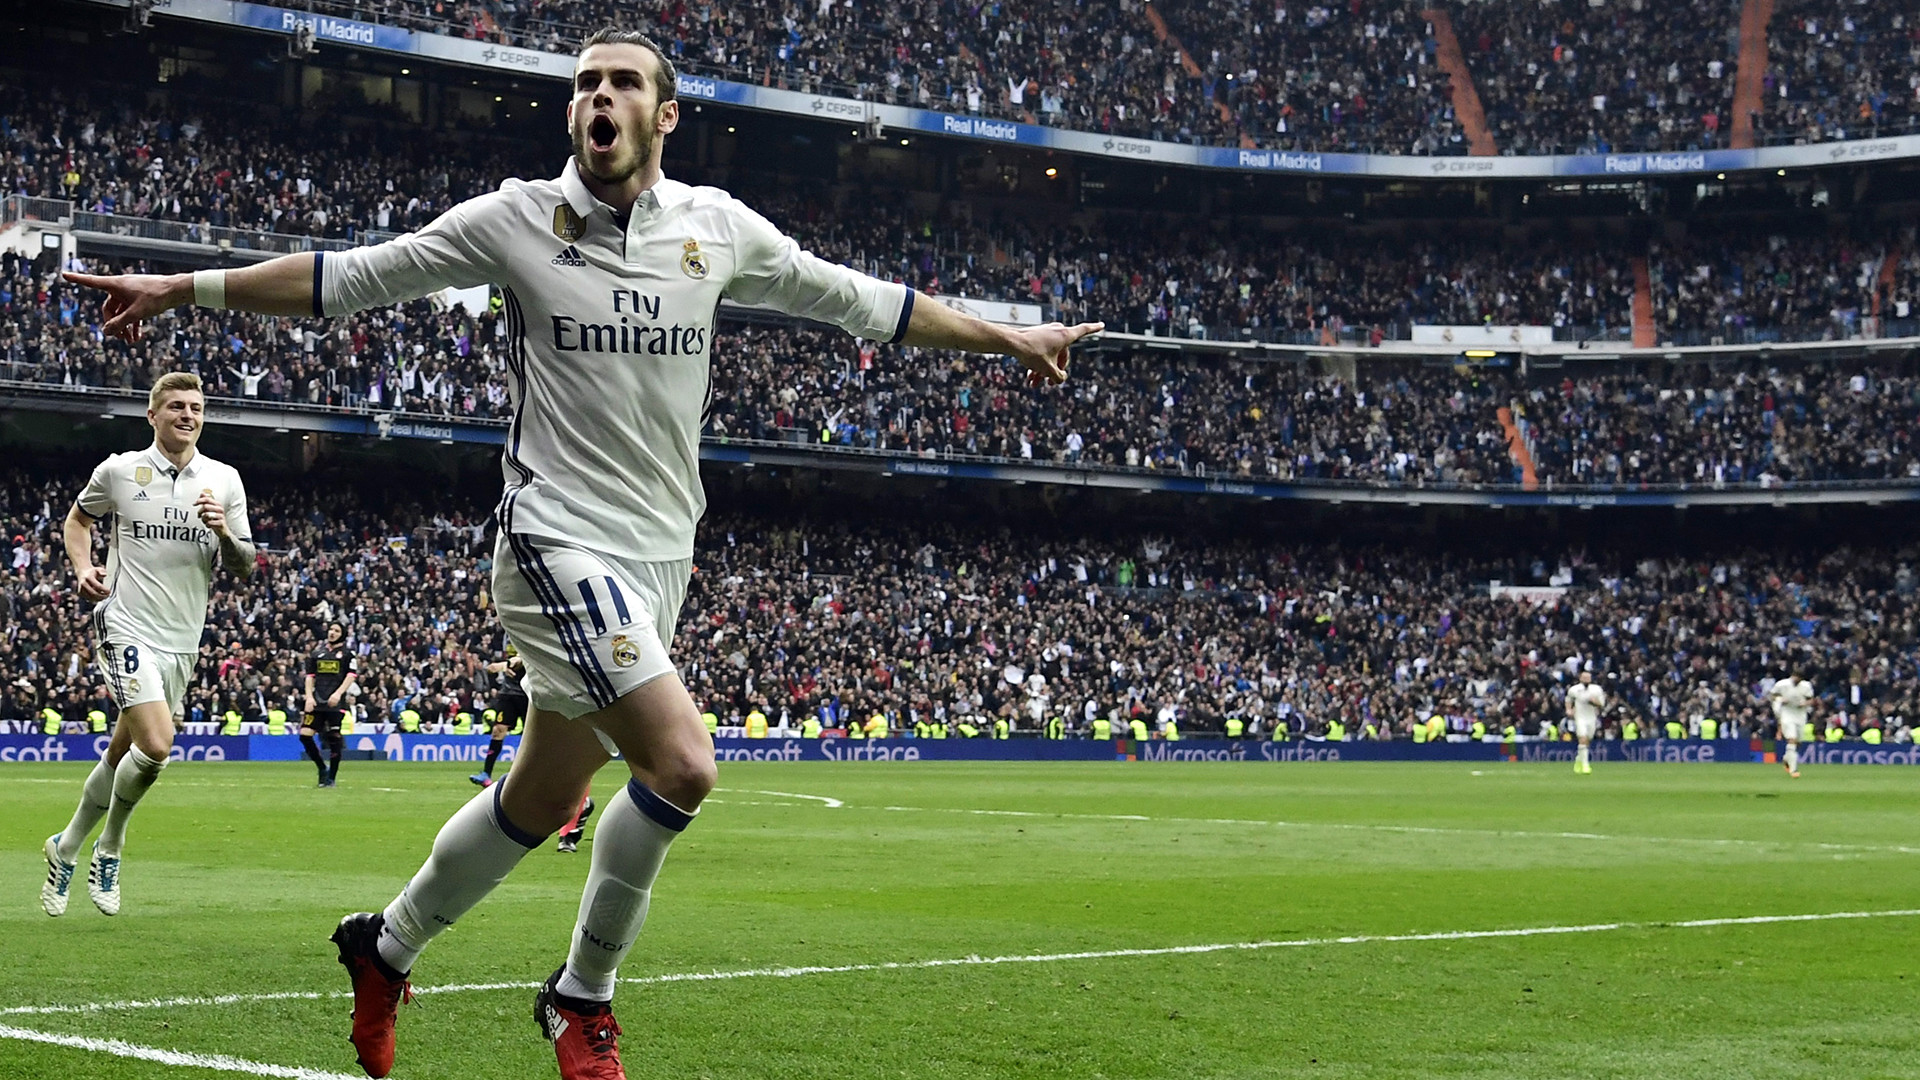 1920x1080 Real Madrid Vs. Spurs: Gareth Bale's 6 Best Goals in a White Shirt